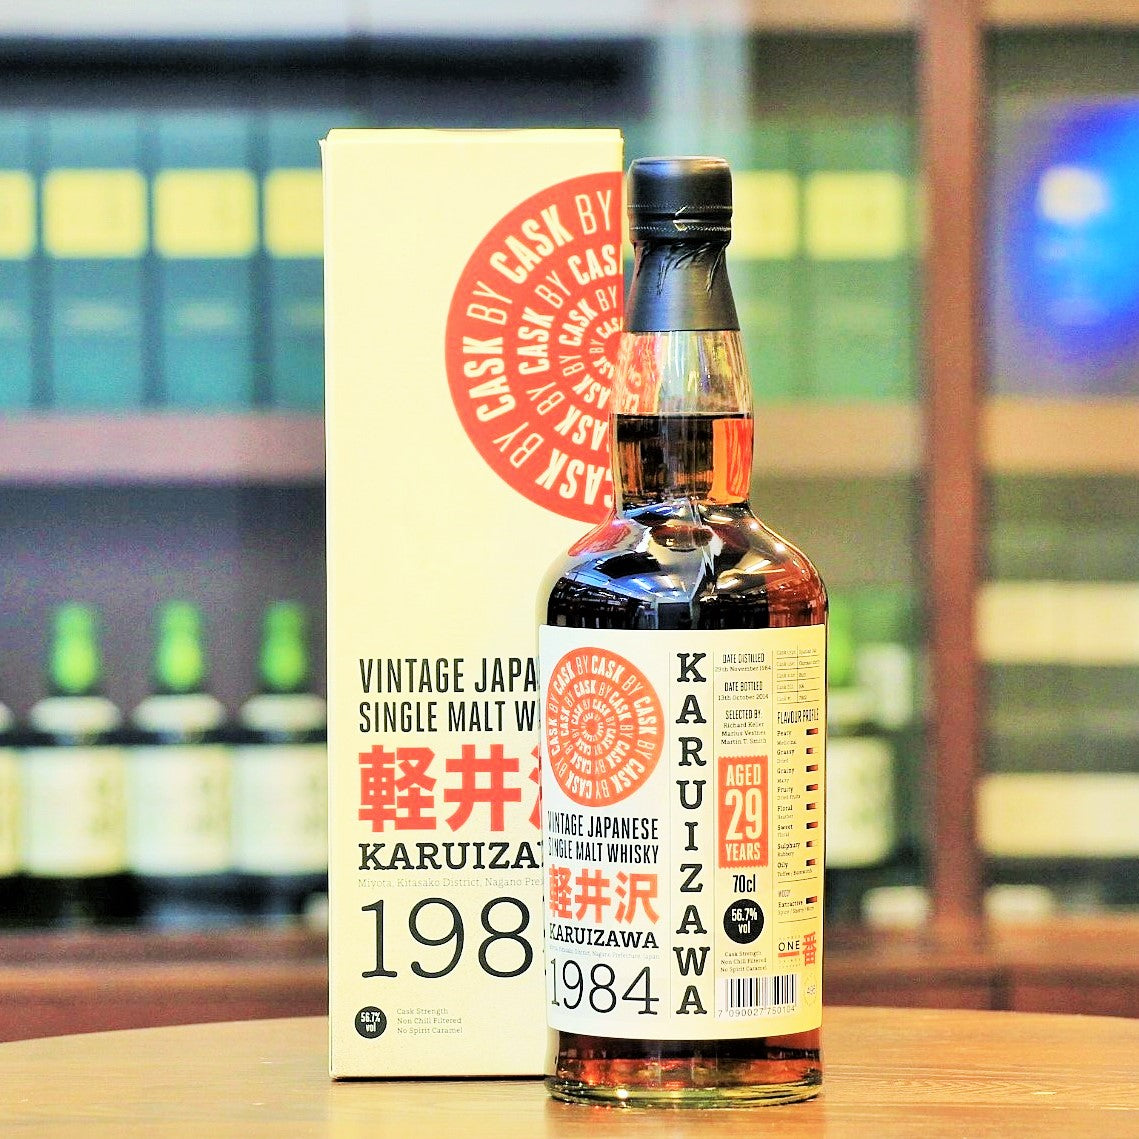 A rare and vintage Karuizawa single malt Japanese whisky bottled for Cask by Cask. Distilled in 29th November 1984, matured in Spanish oak olorosso sherry butt #7802 and bottled in 13th October 2014. Selected by Richard Keller, Marius Vestnes and Martin T. Smith from CASK BY CASK.